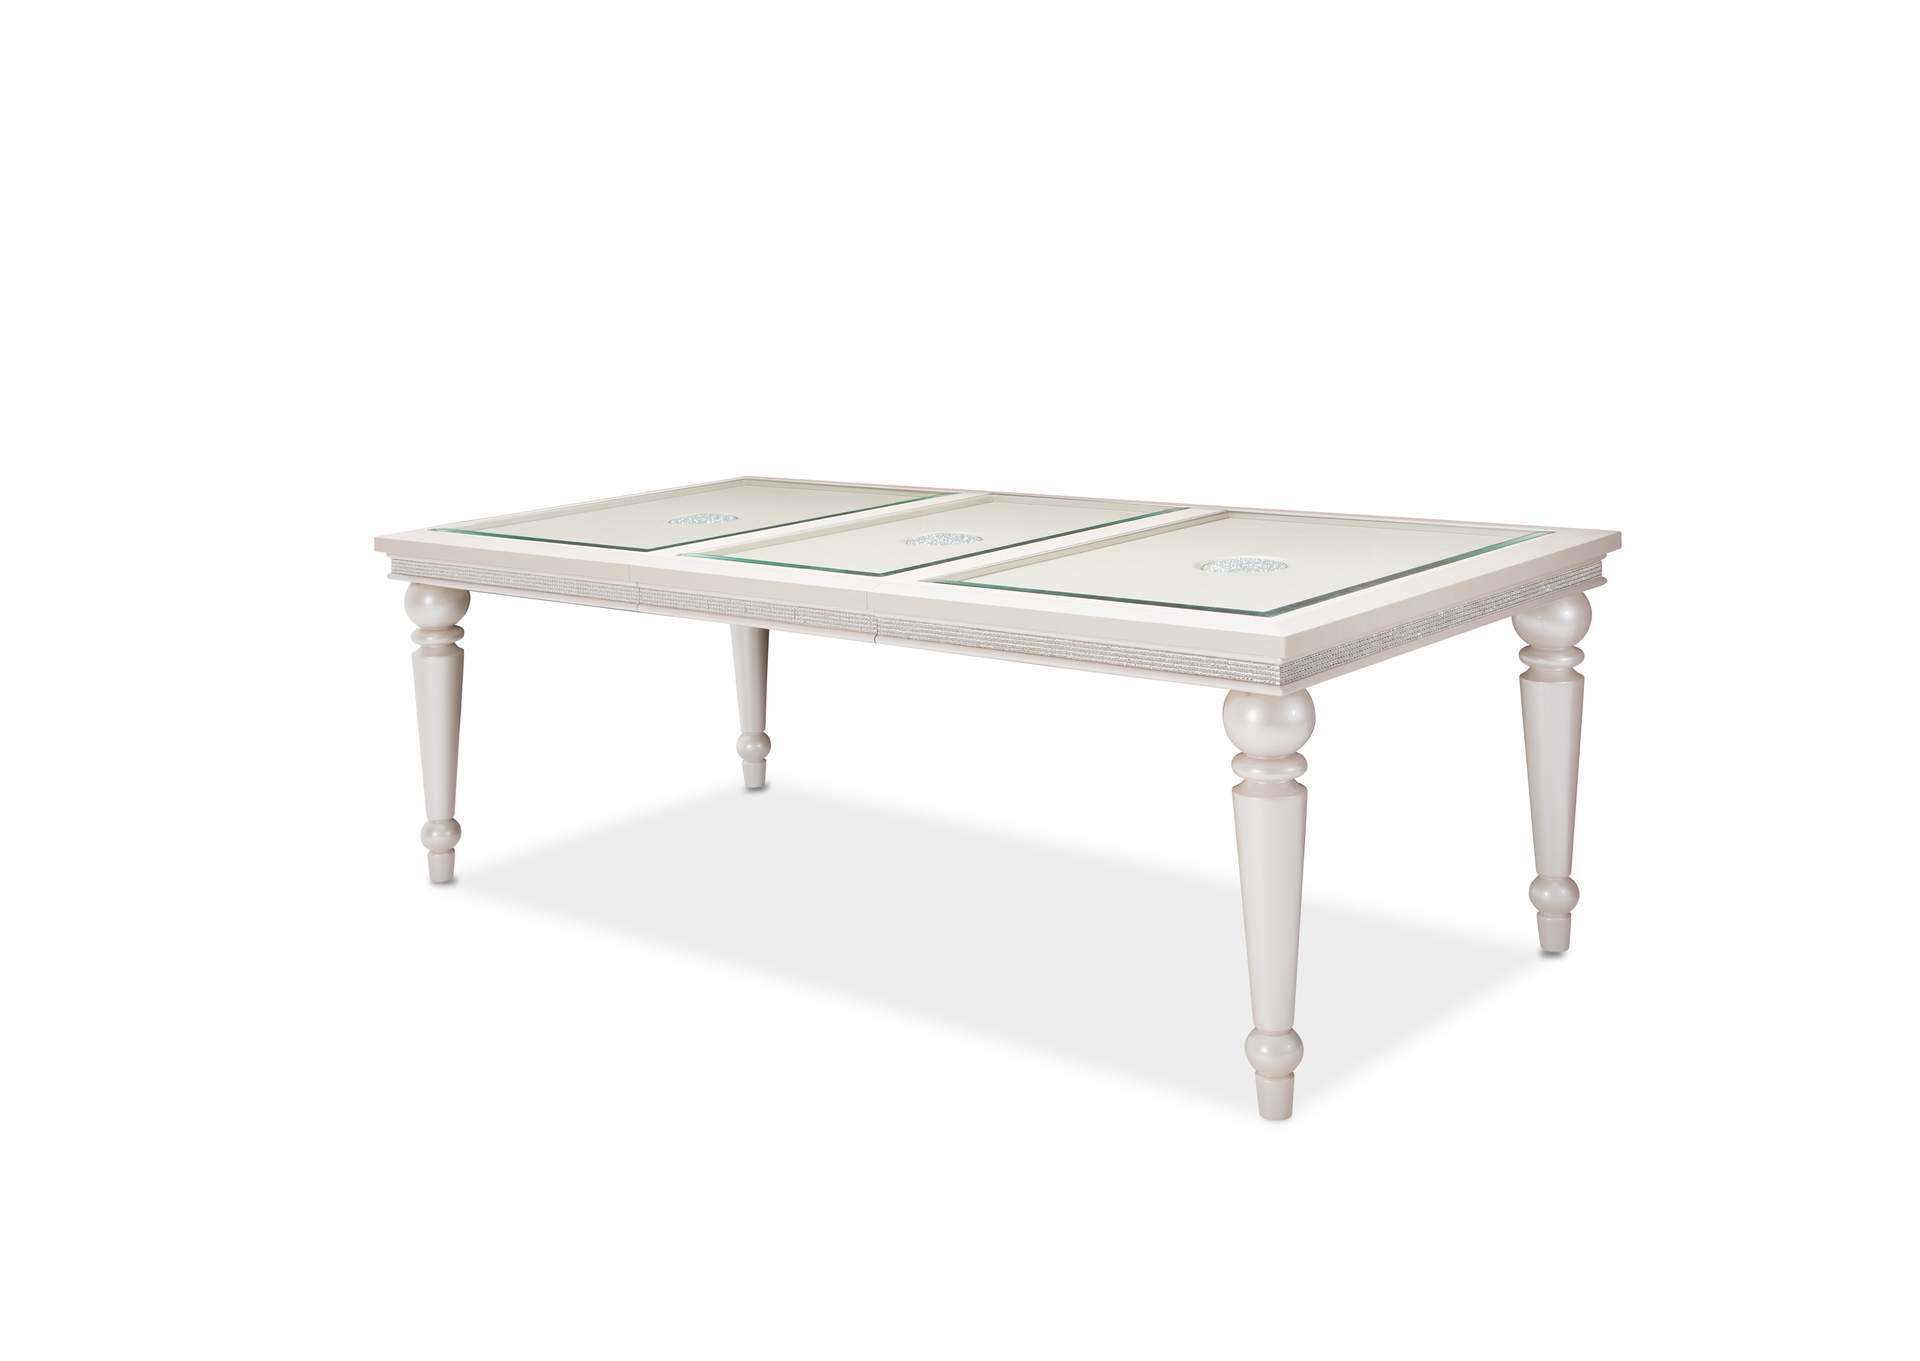 Glimmering Heights 4 Leg Dining Table w/Glass Insert,Michael Amini (AICO)